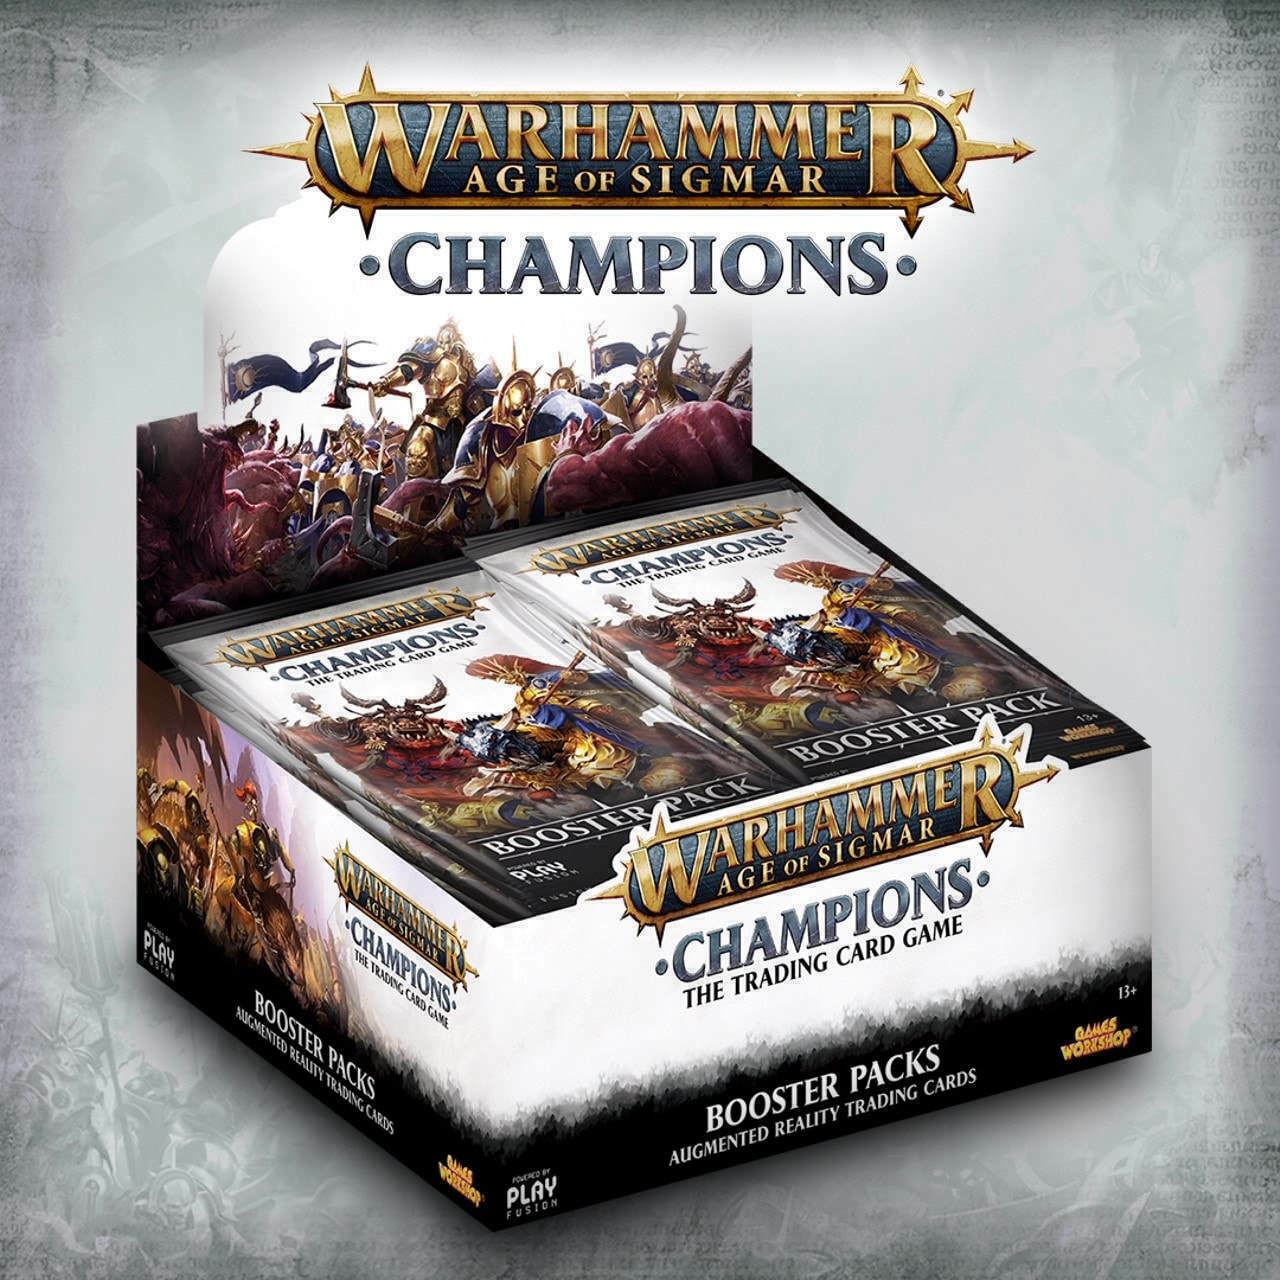 Warhammer Age of Sigmar Champions Booster Box